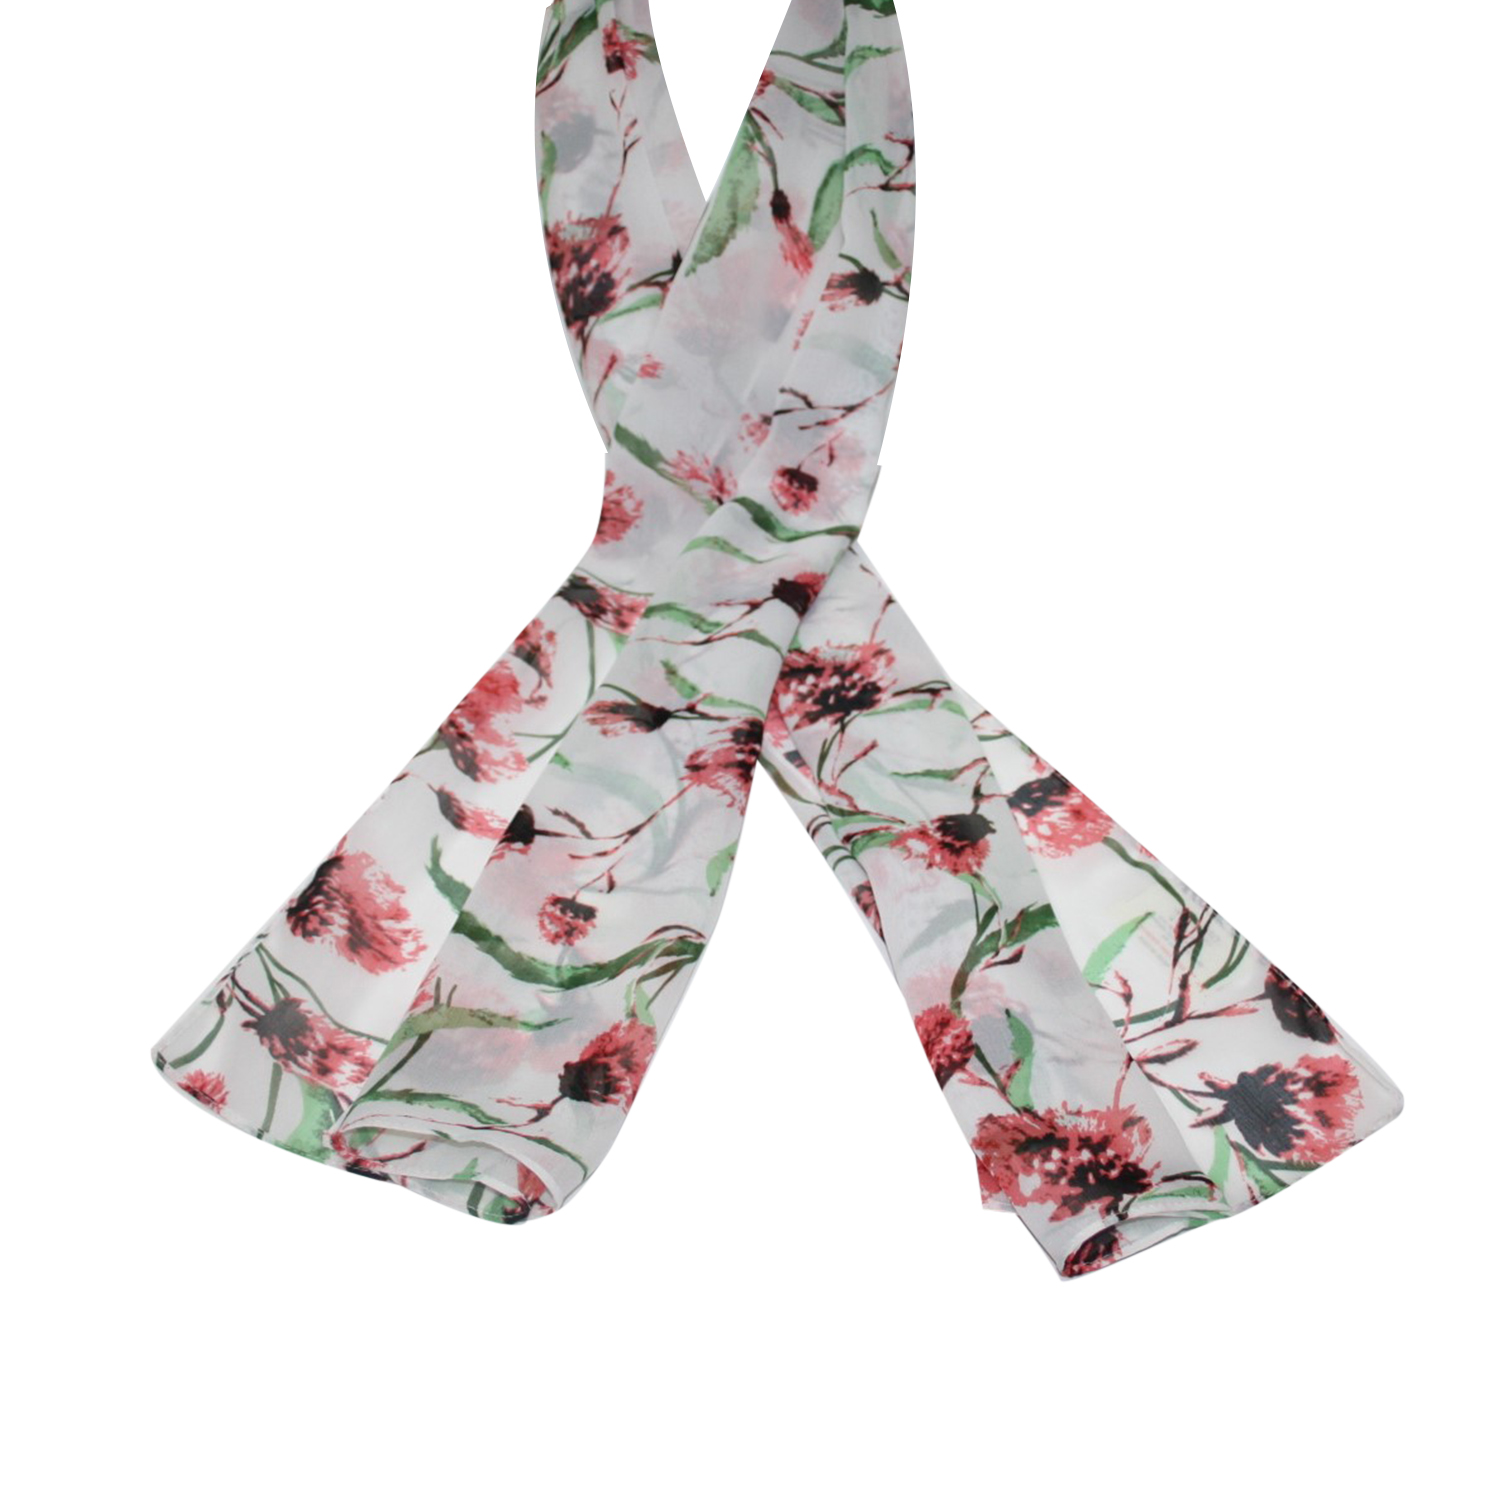 SUGARCRISP Chiffon White and Coral Floral Printed Scarf (152x45cm)